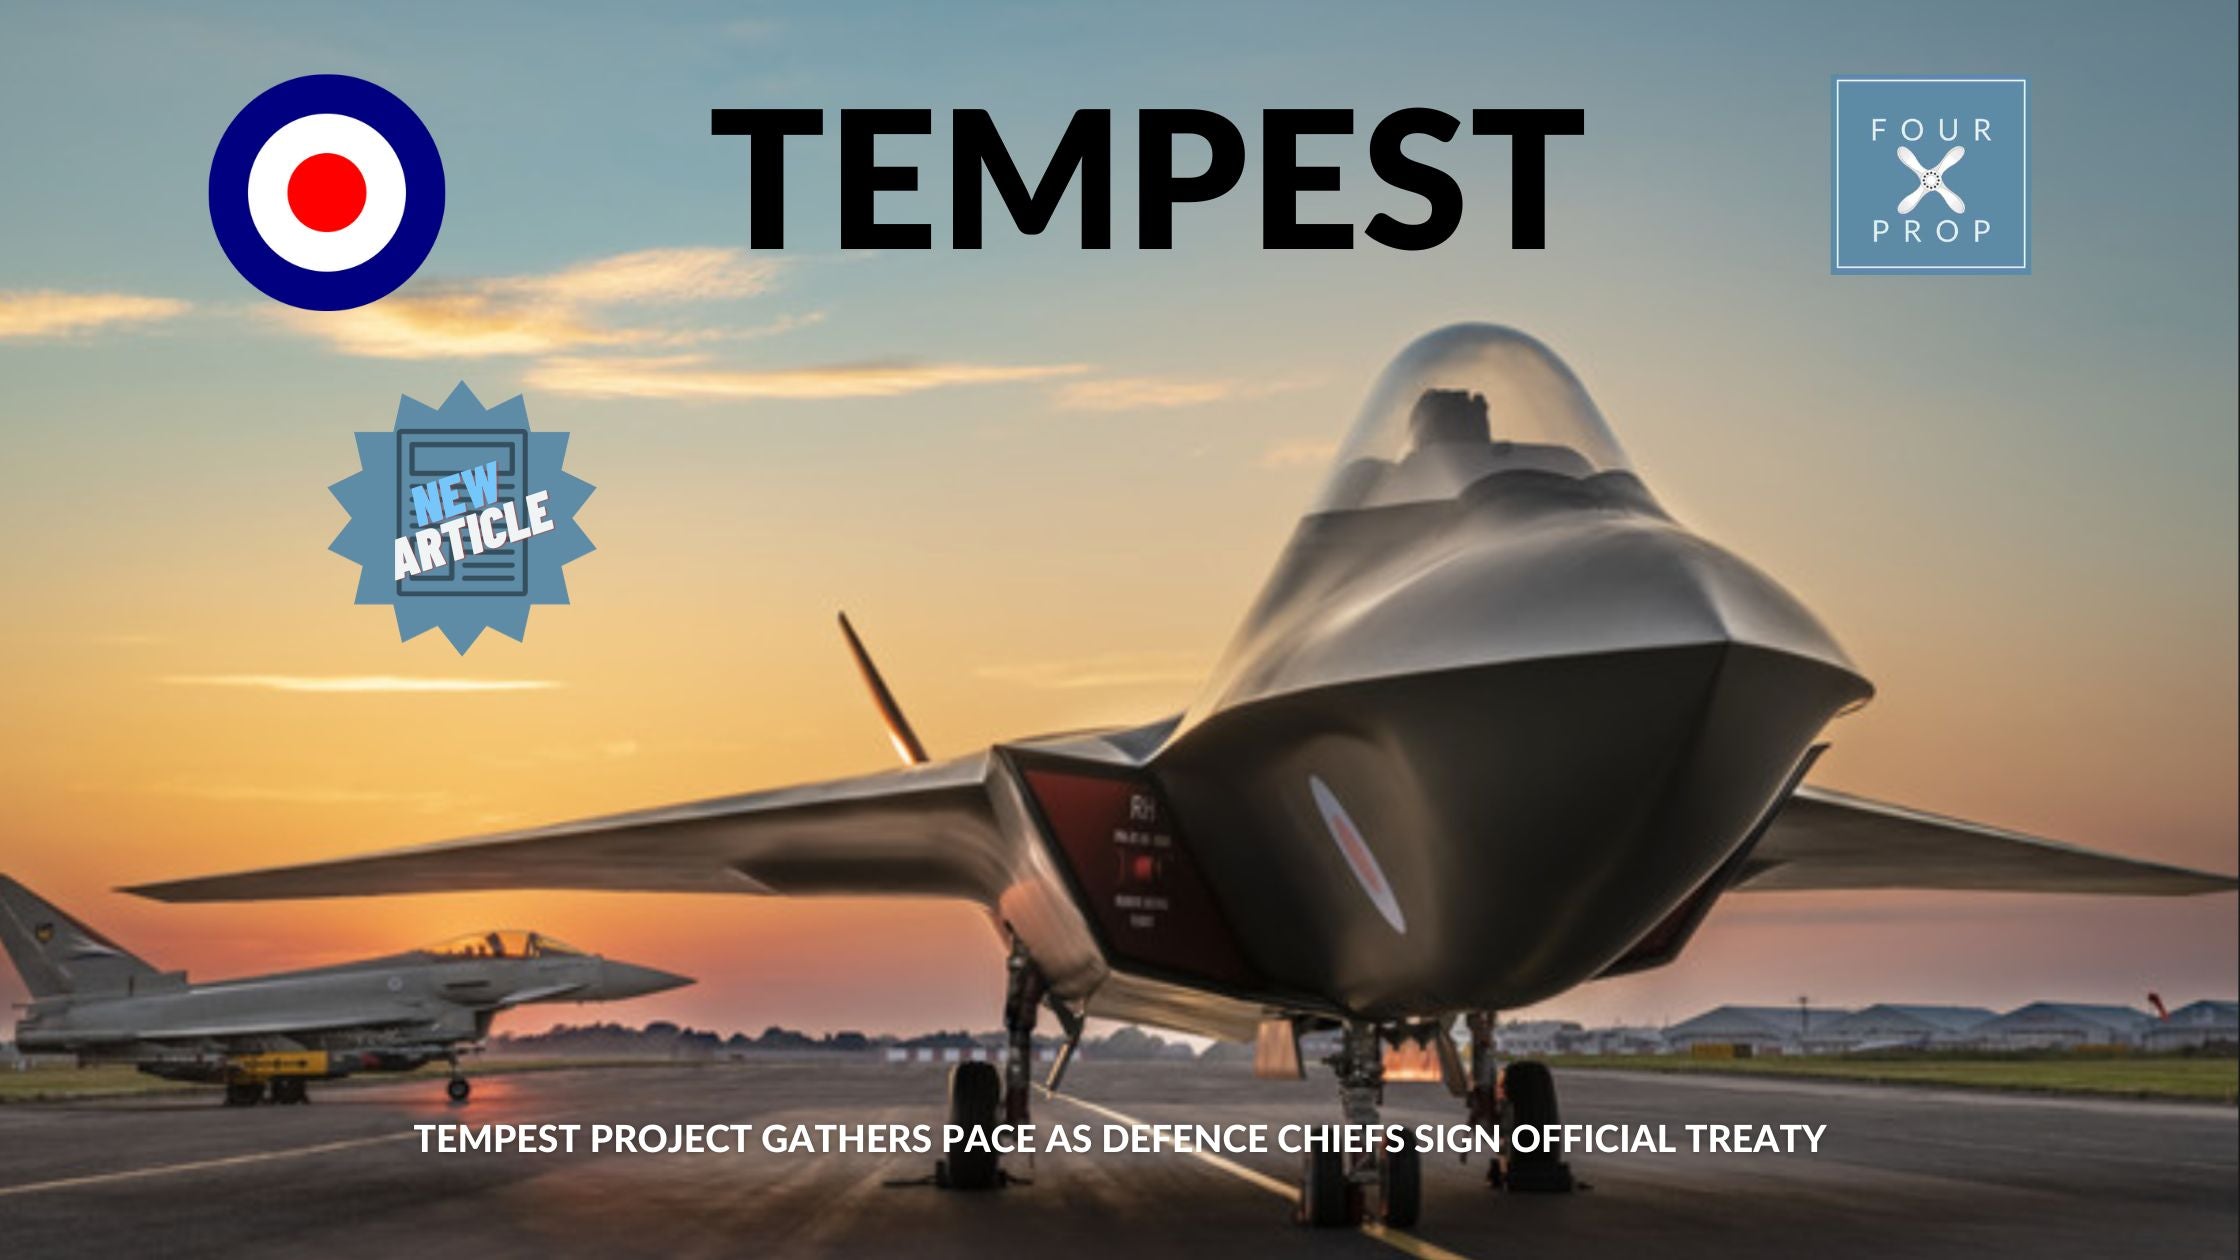 Tempest Project Gathers Pace